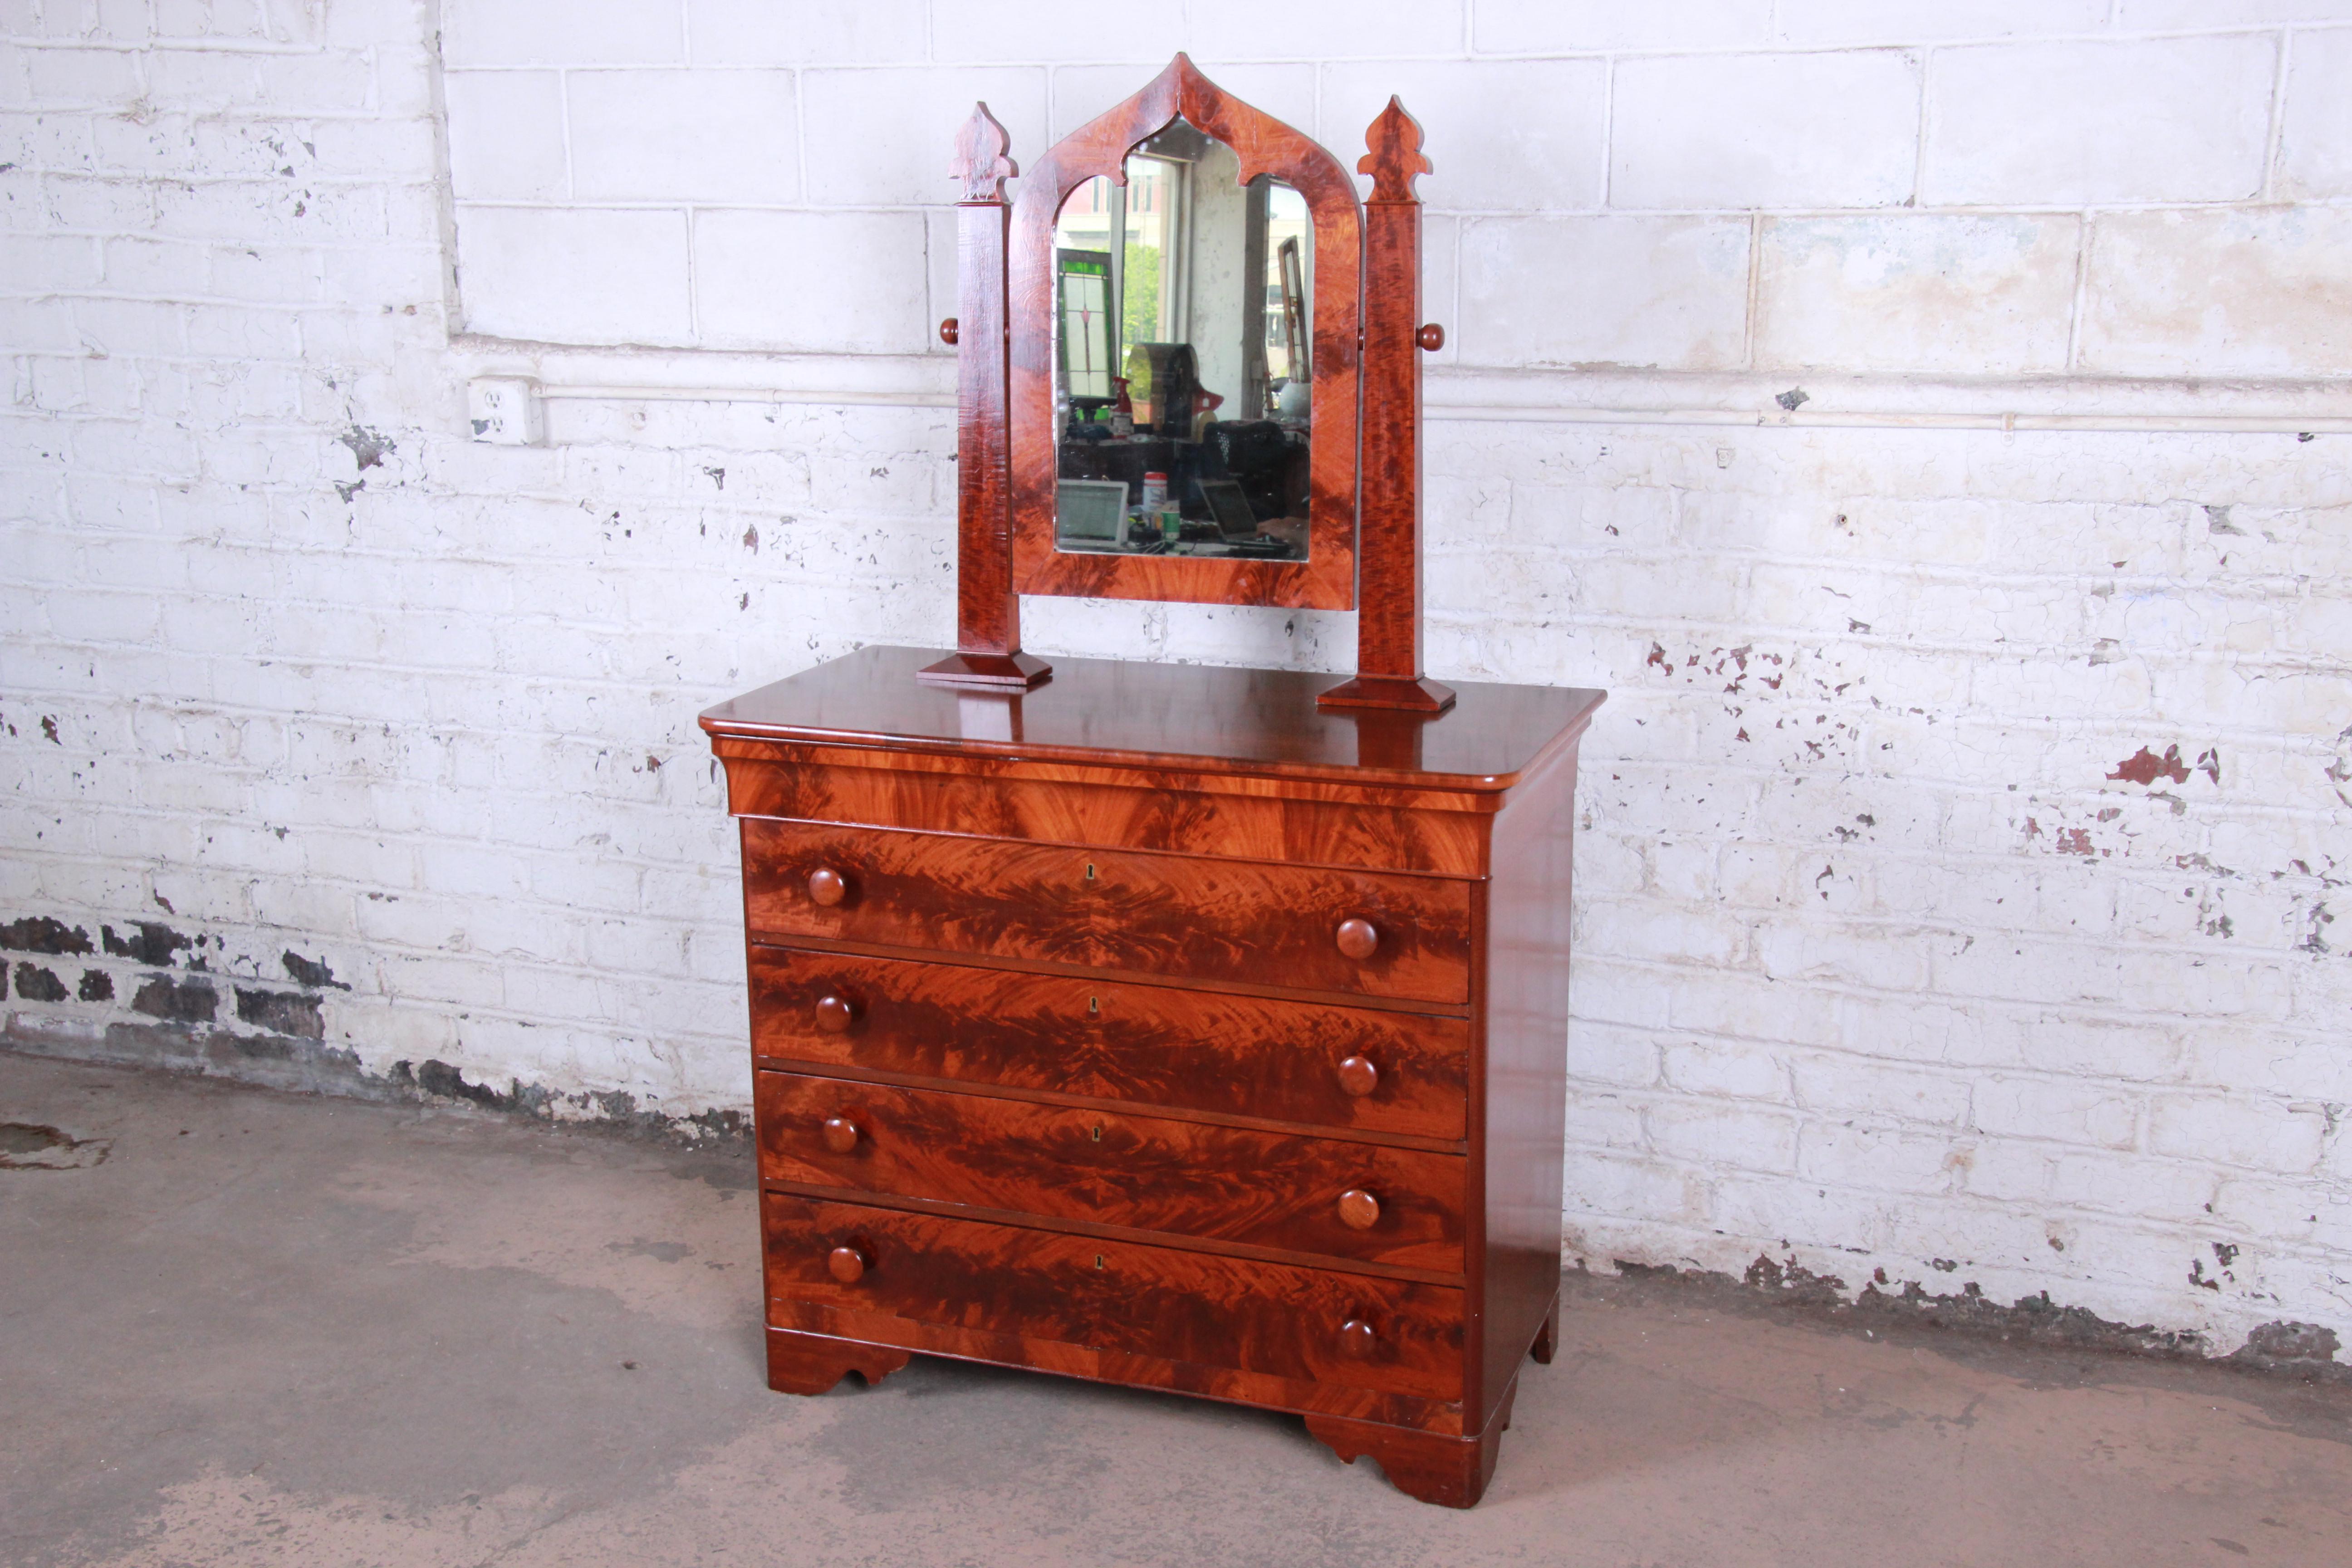 An exceptional 19th century American Empire mahogany dresser with mirror. The dresser features stunning flame mahogany wood grain and a unique Gothic Cathedral style swing mirror. It offers ample storage, with five dovetailed drawers. The dresser is